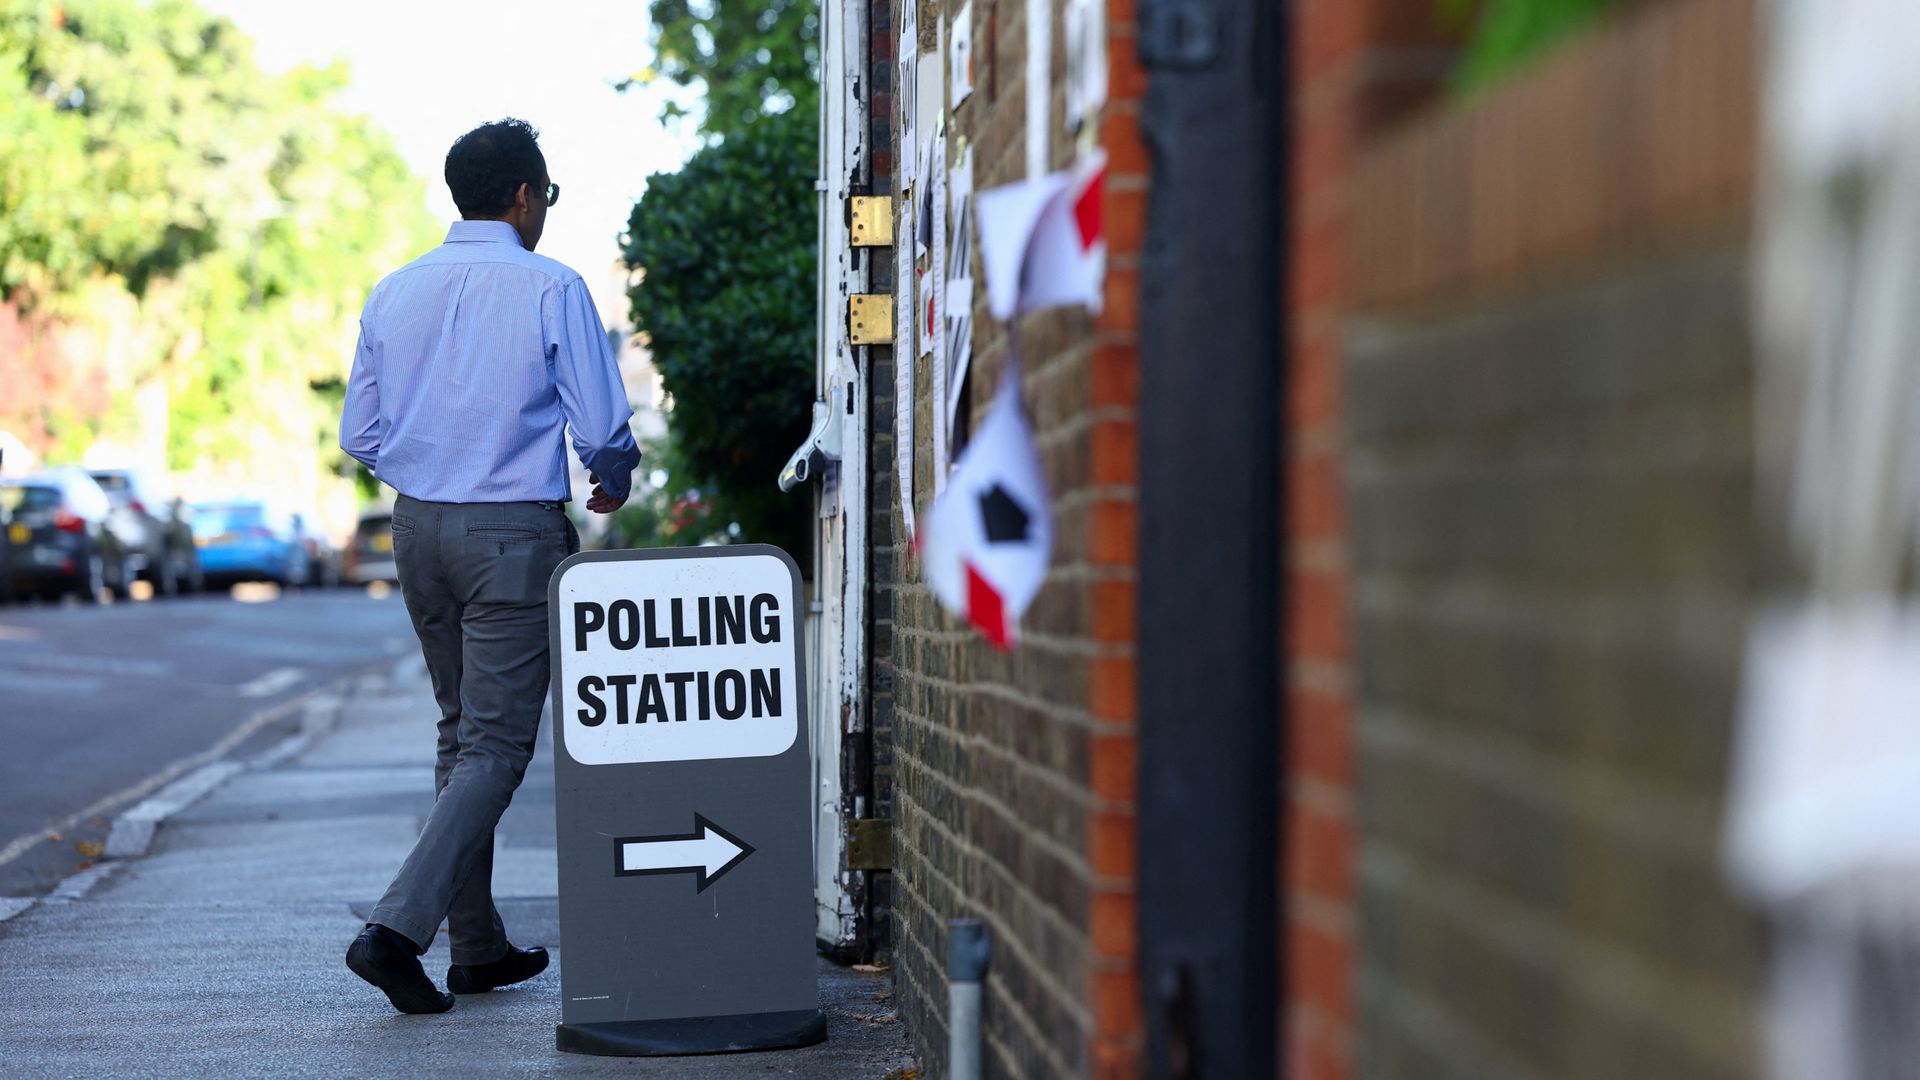 Millions casting their votes in general election